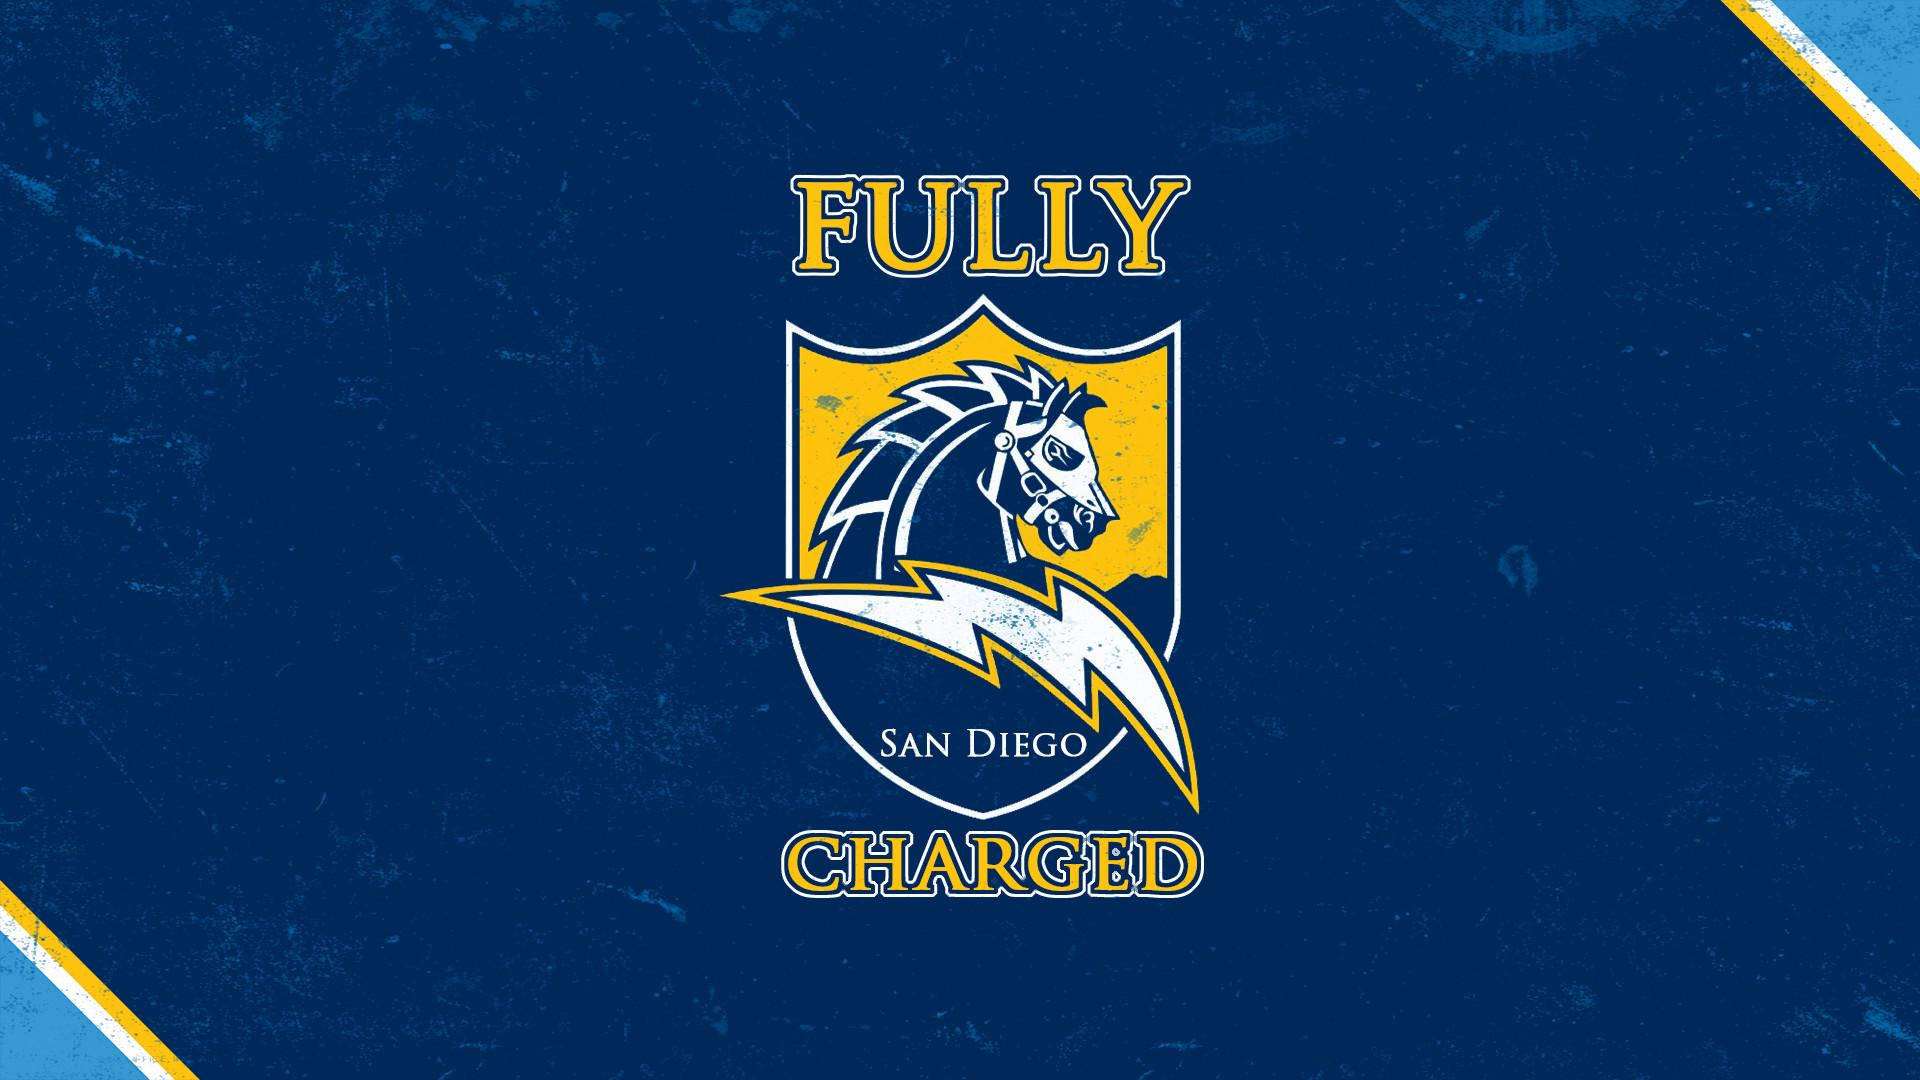 Remarkable Los Angeles Chargers Full Logo Wallpaper